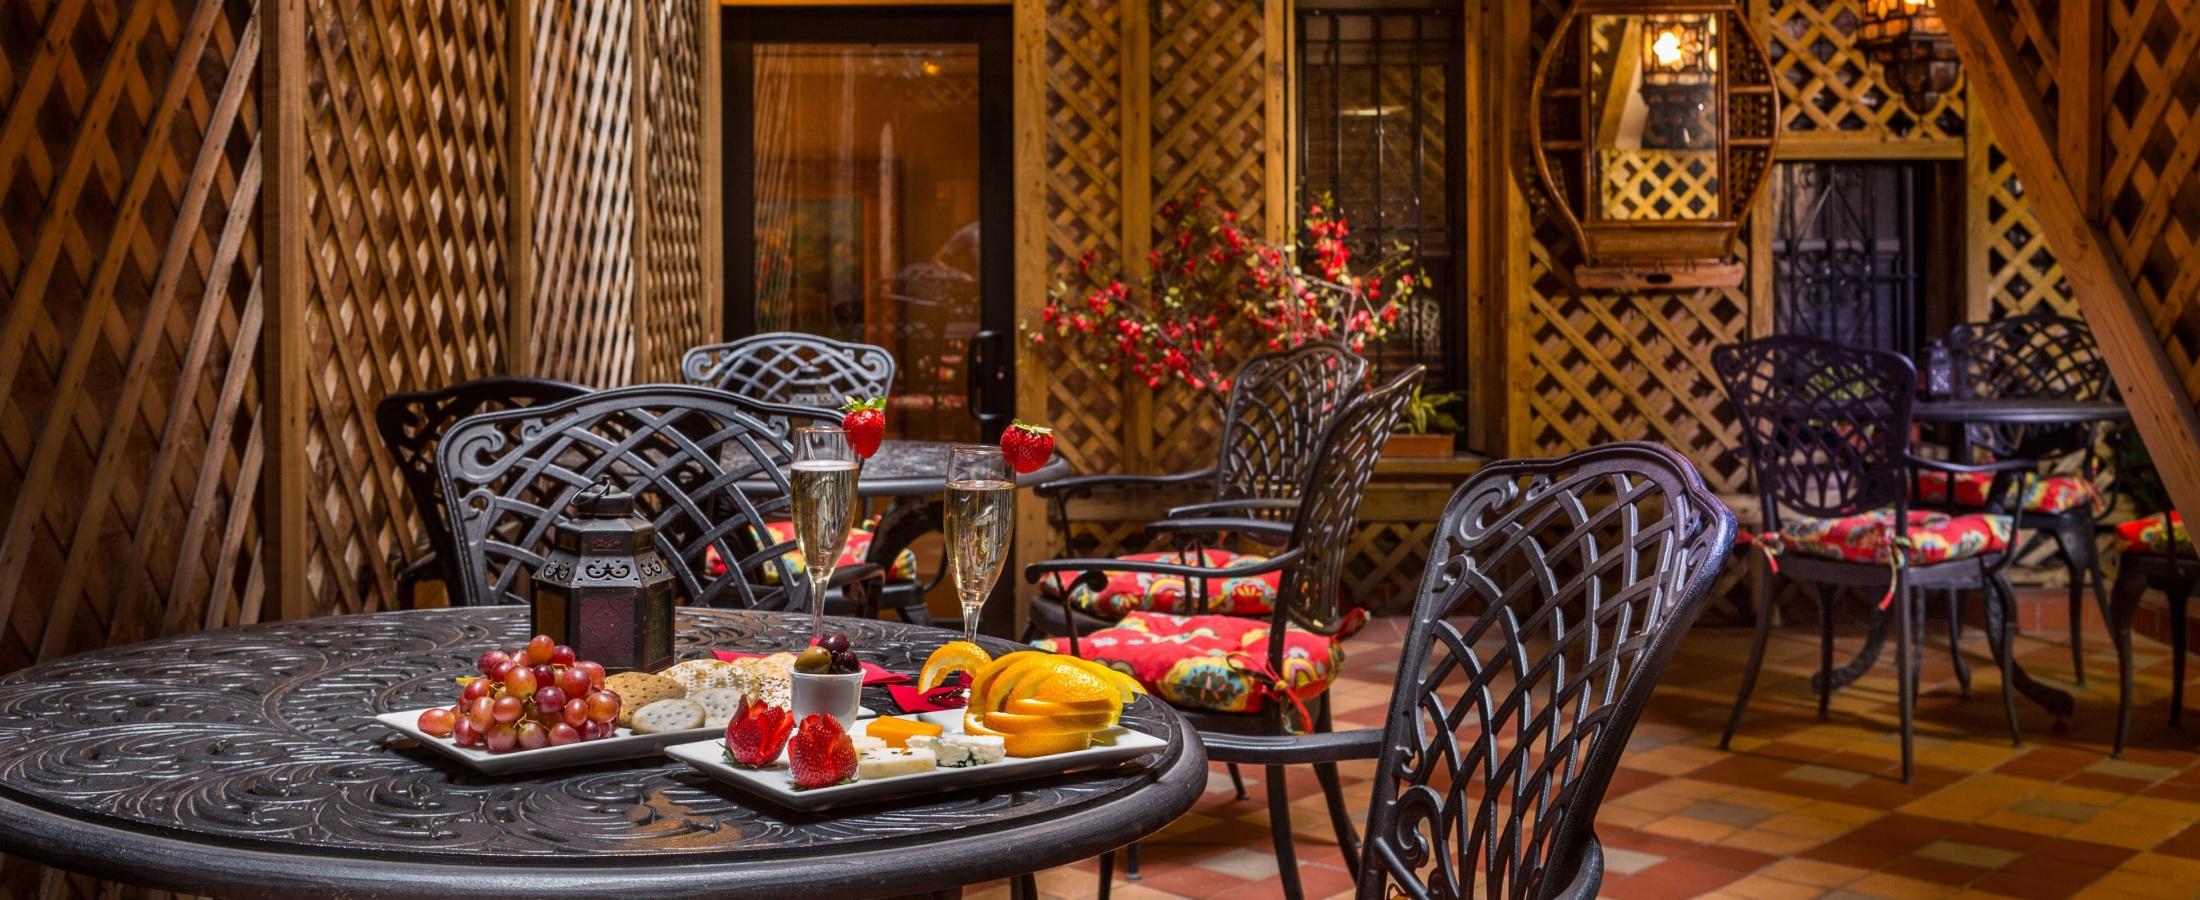 Guests are invited to enjoy our complimentary Wine & Cheese Reception in our Blue Parrot Courtyard!